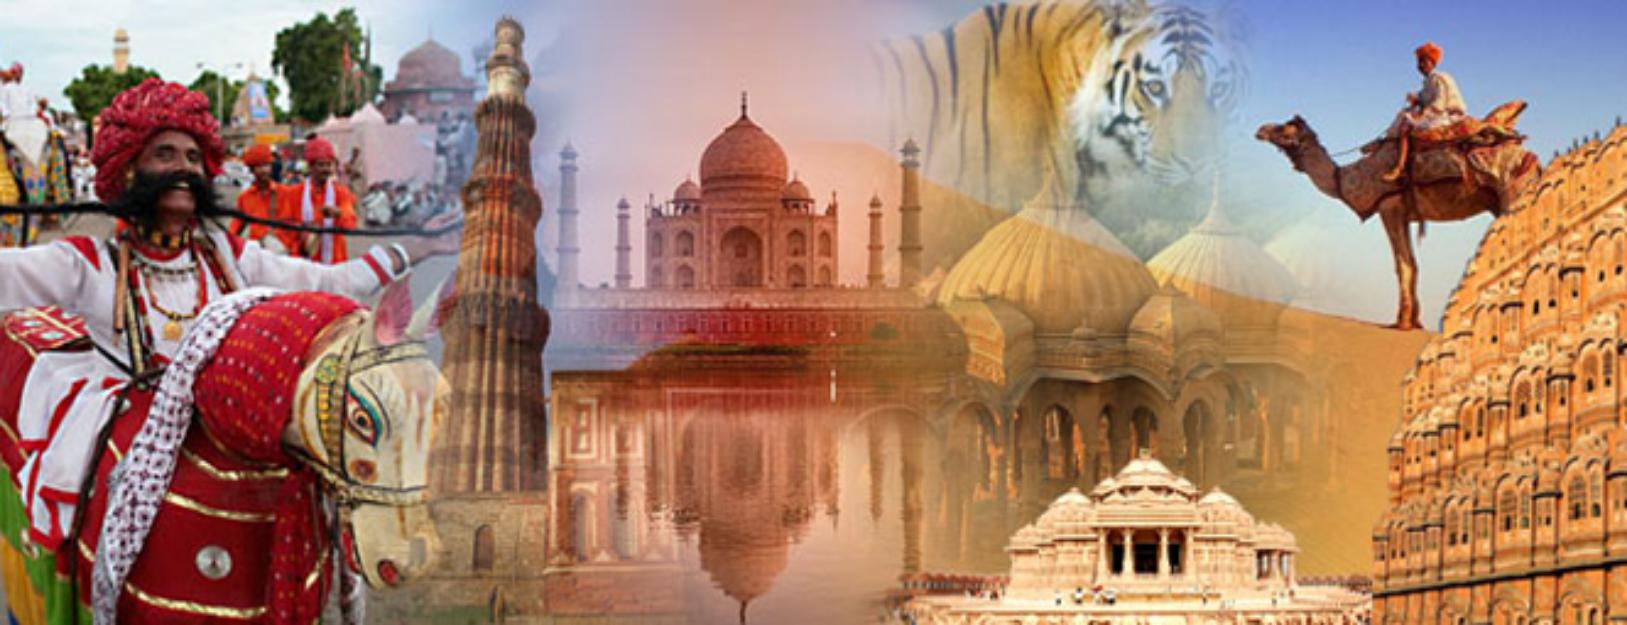 golden triangle tour package